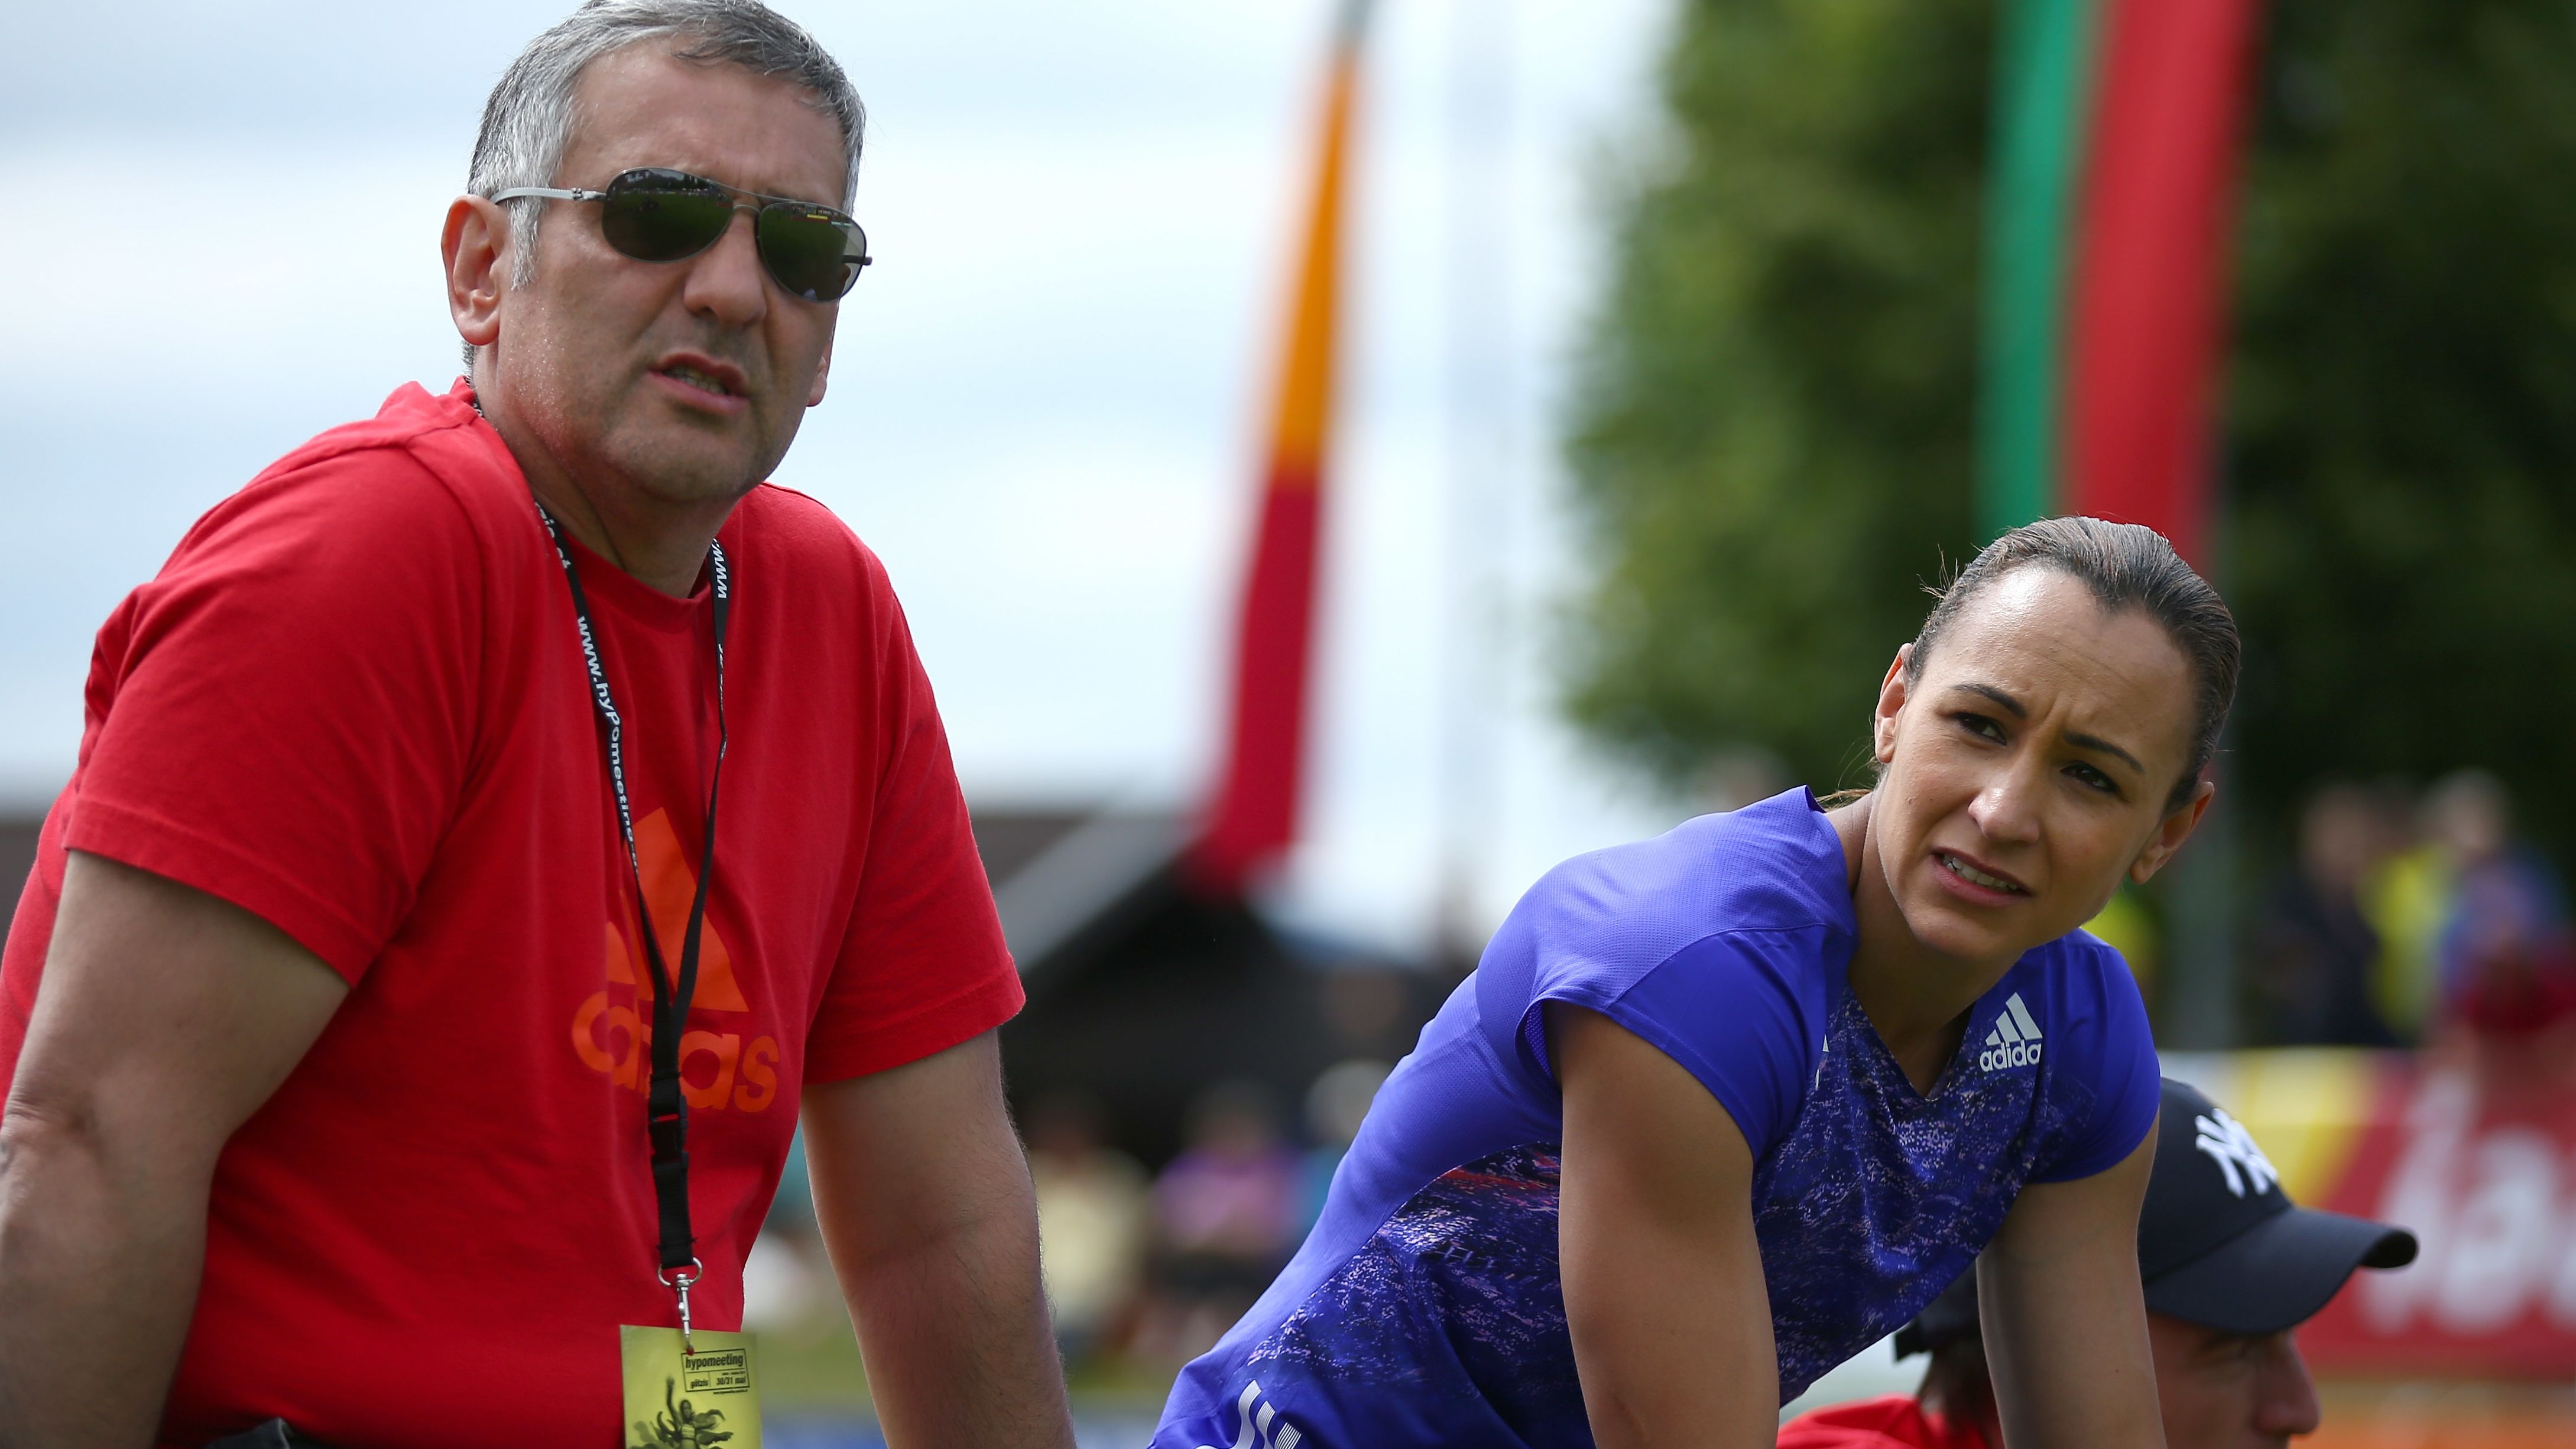 Toni Minichiello, former coach of Olympic gold medalist Jessica Ennis-Hill,  handed lifetime ban by UK Athletics for alleged sexually inappropriate  conduct | CNN